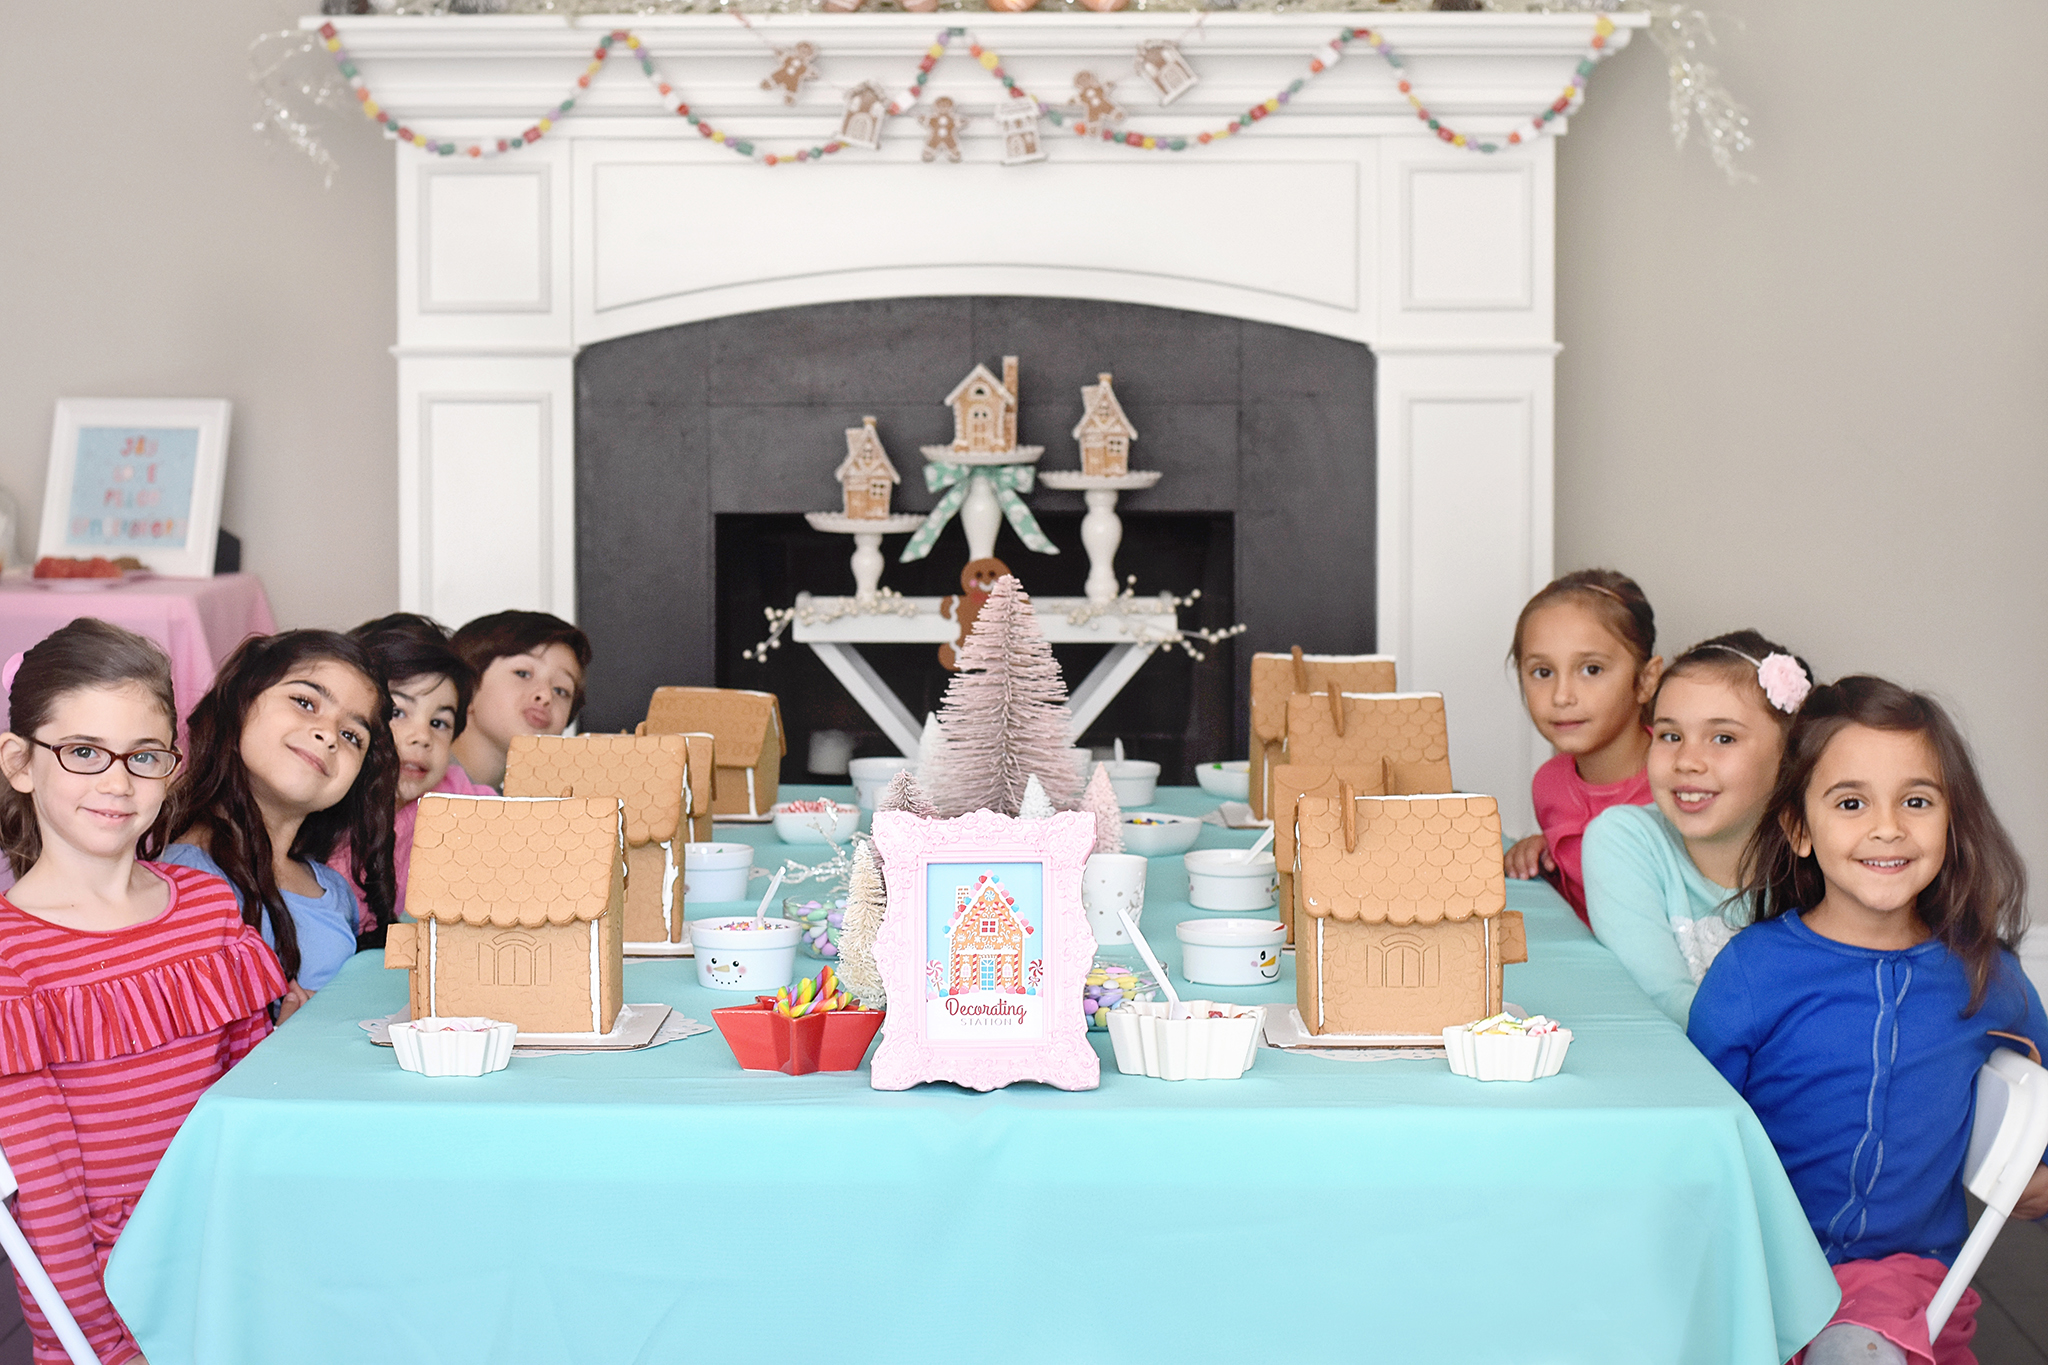 Make sure you have a big table so the kids have plenty of room to decorate!